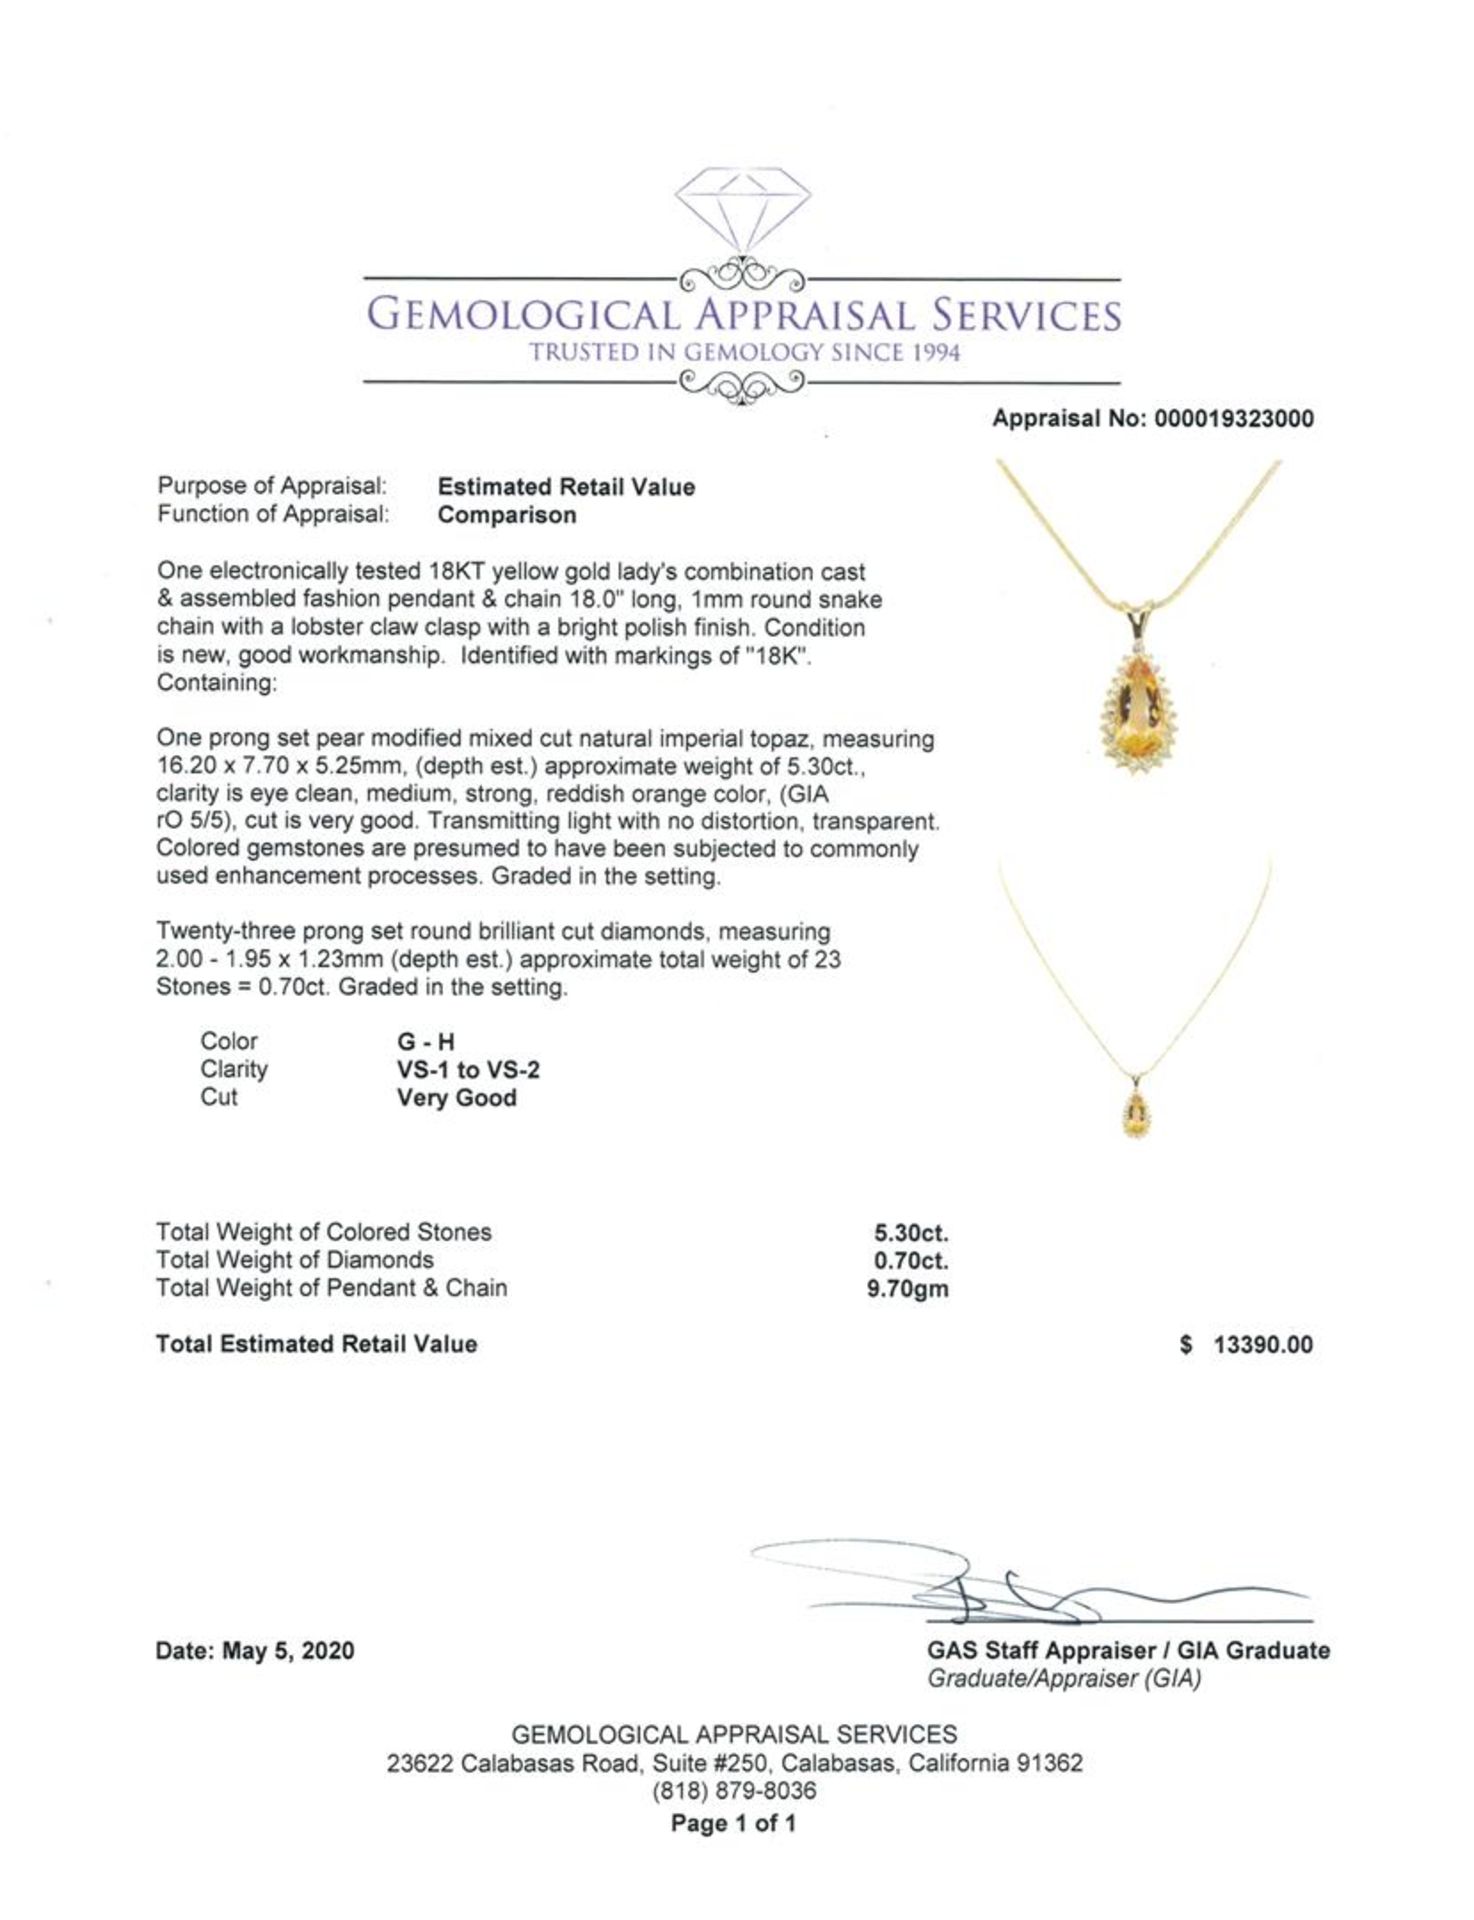 6.00 ctw Imperial Topaz And Diamond Pendant & Chain - 18KT Yellow Gold - Image 3 of 3